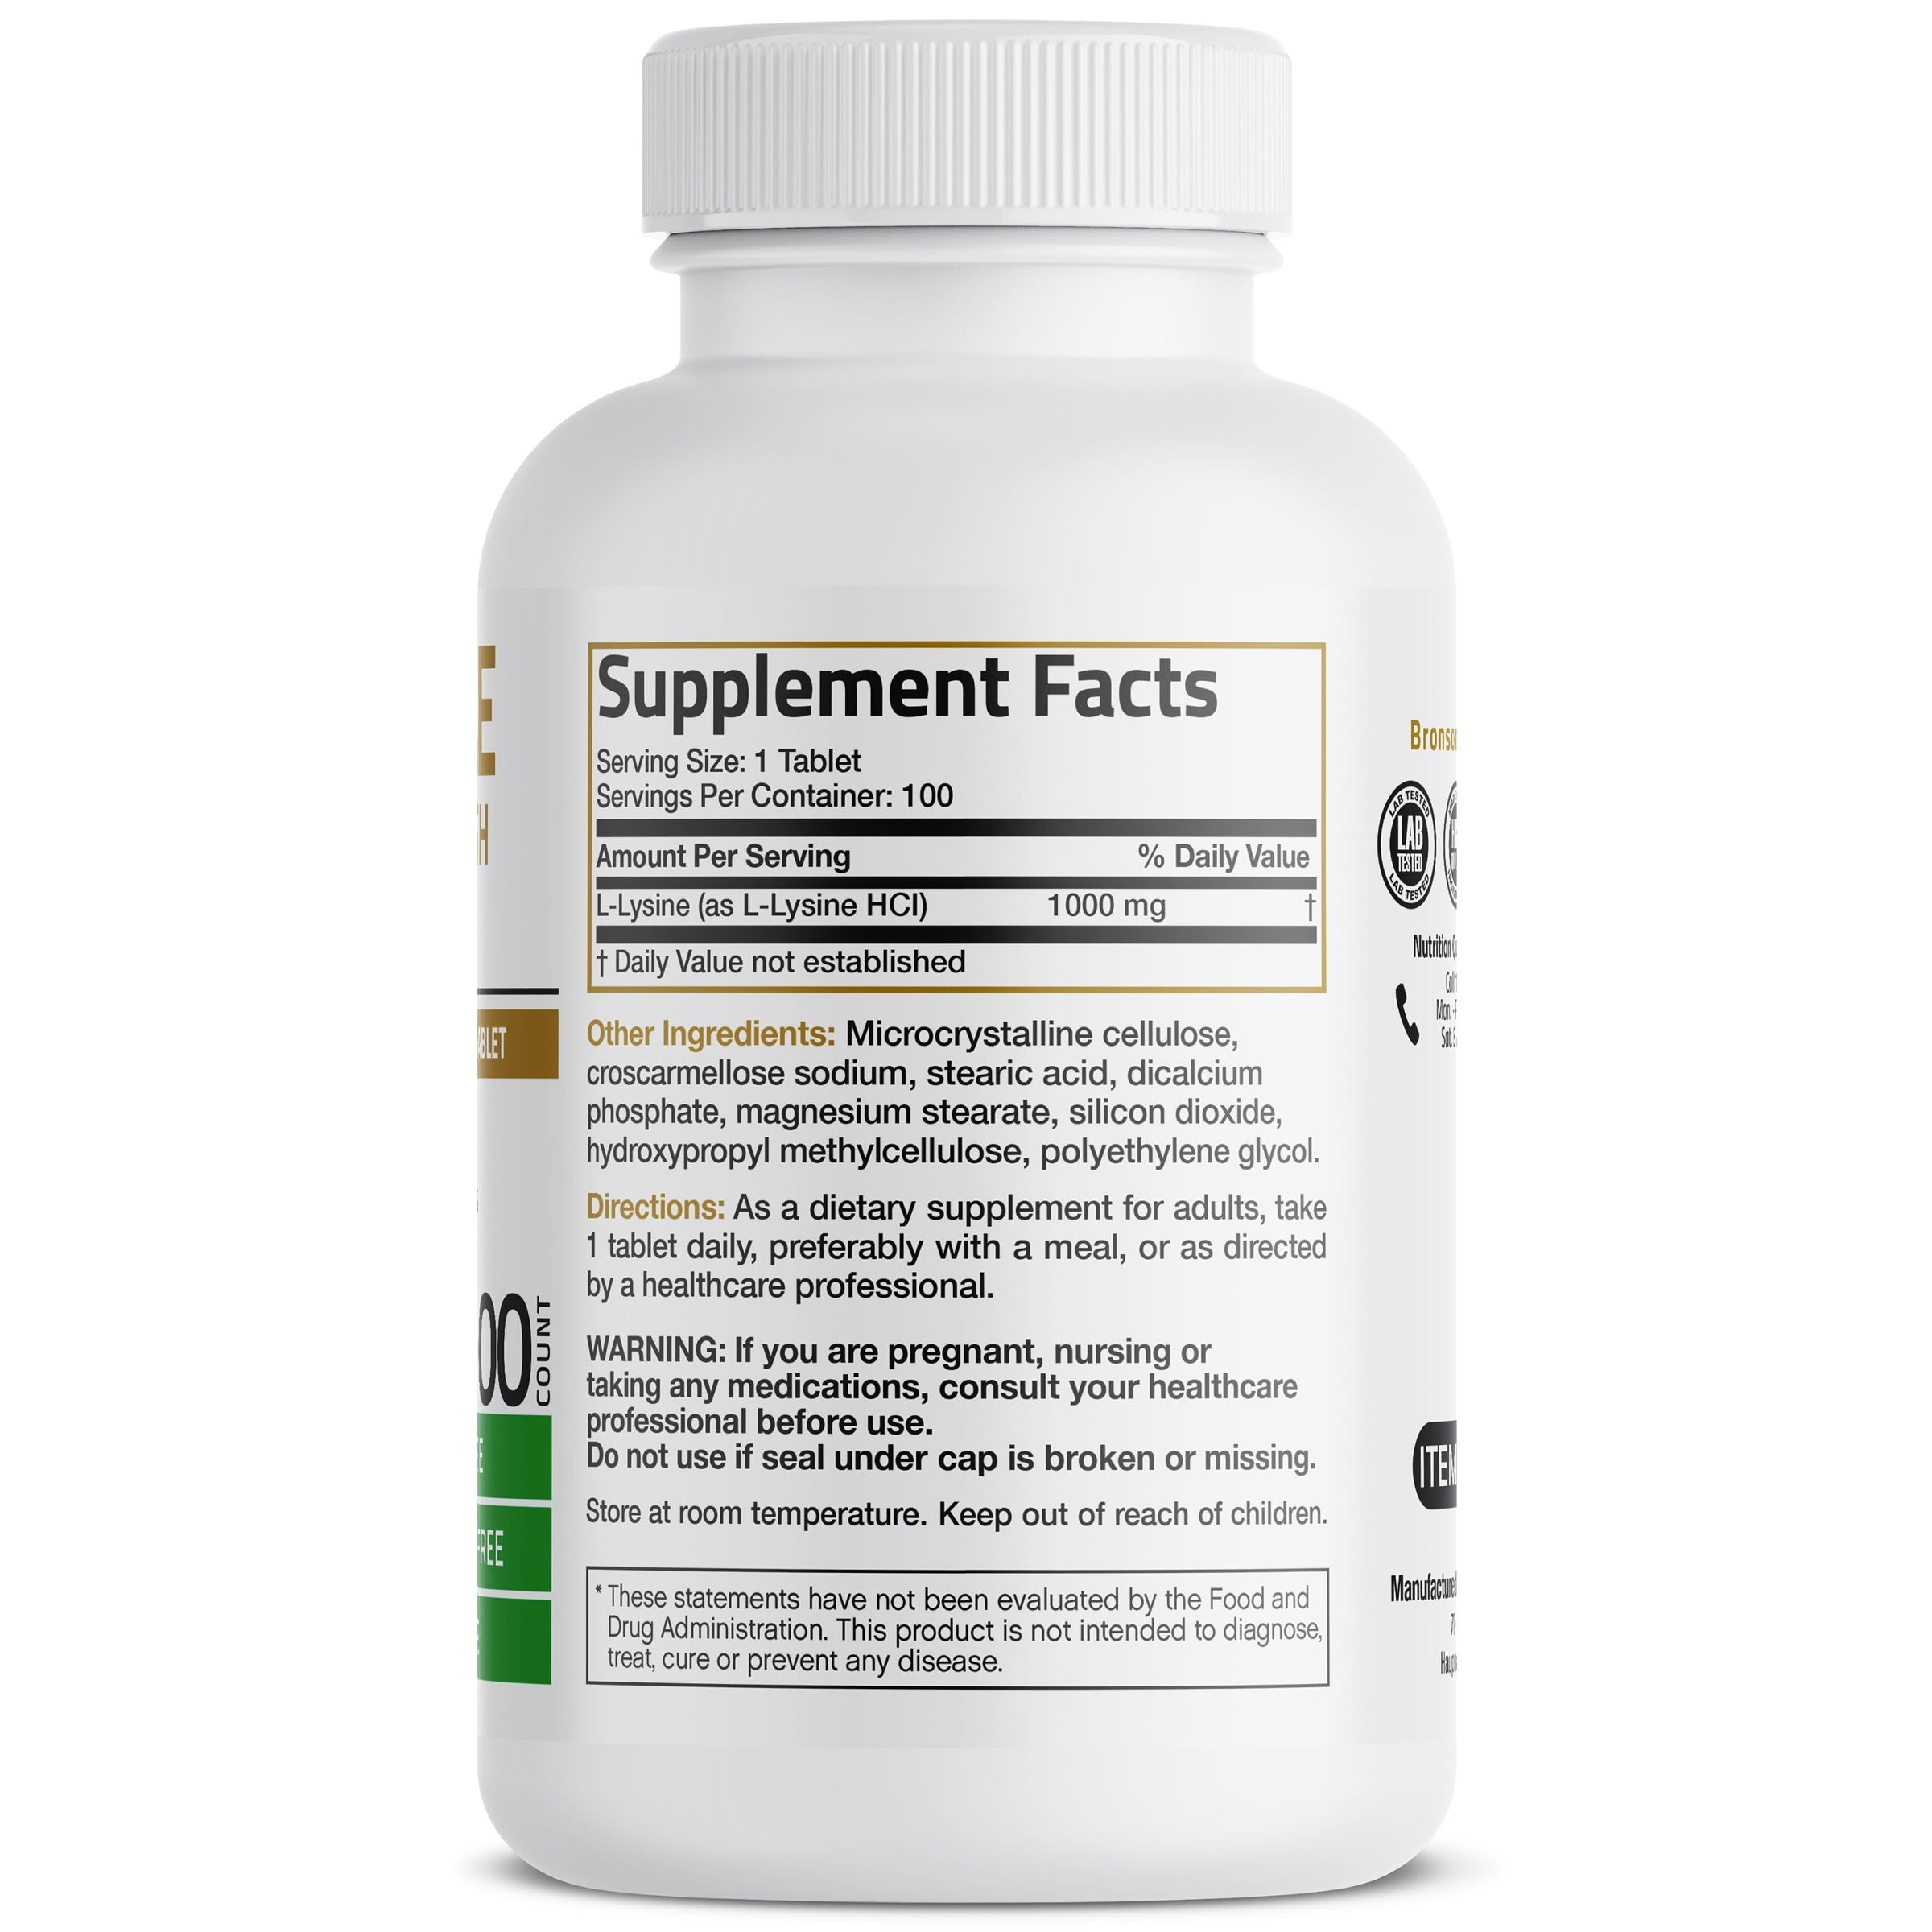 L-Lysine Extra Strength 1,000 MG view 2 of 6